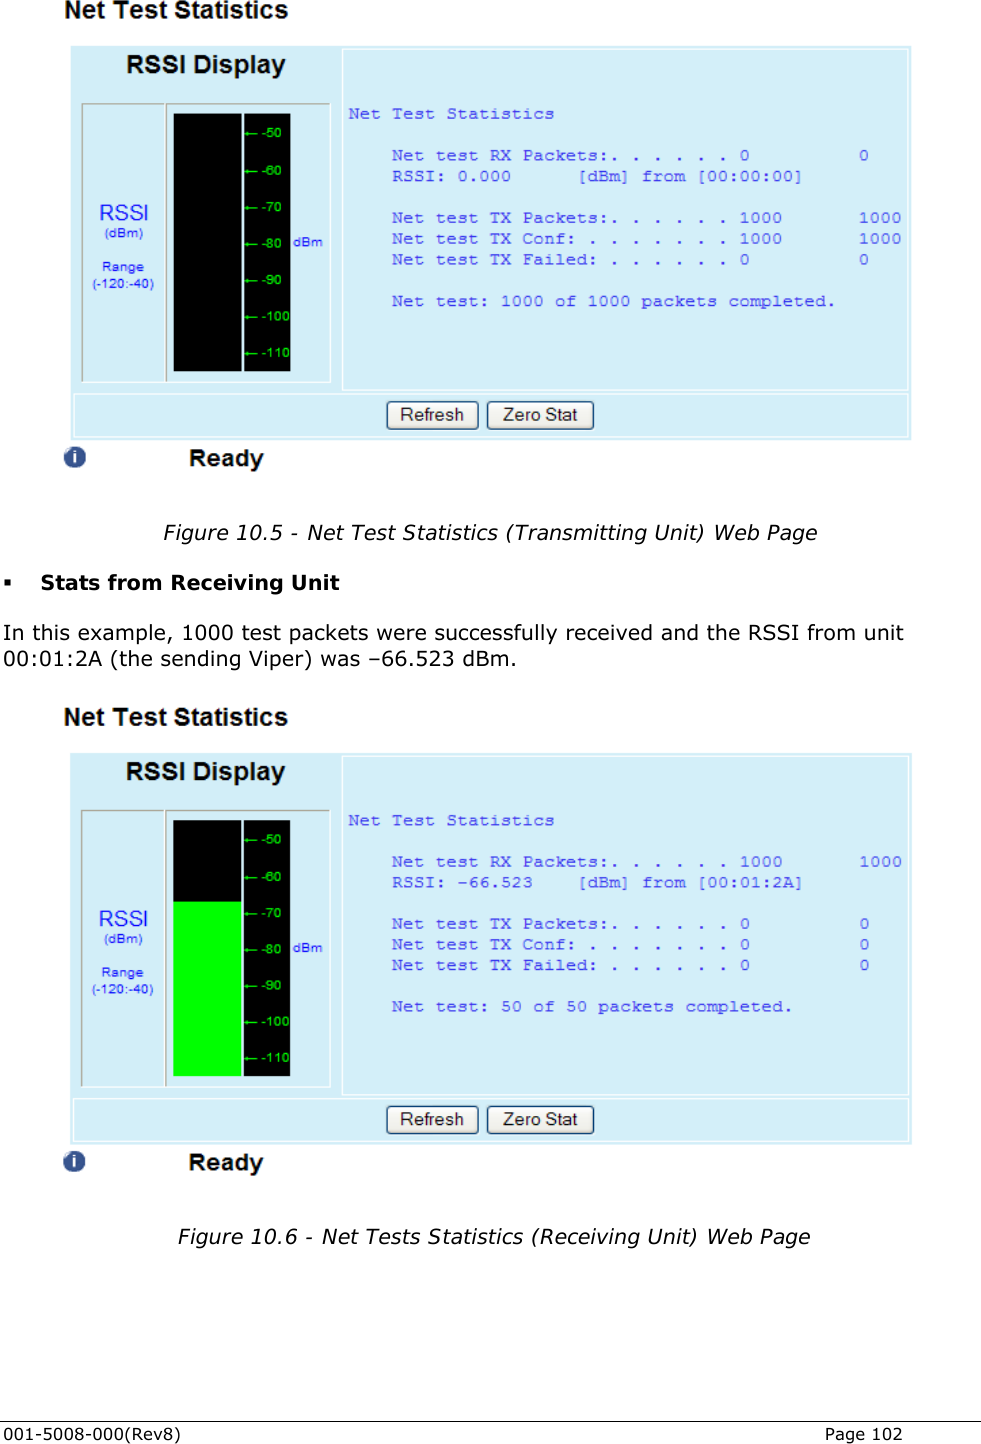   Figure 10.5 - Net Test Statistics (Transmitting Unit) Web Page  Stats from Receiving Unit In this example, 1000 test packets were successfully received and the RSSI from unit 00:01:2A (the sending Viper) was –66.523 dBm.    Figure 10.6 - Net Tests Statistics (Receiving Unit) Web Page 001-5008-000(Rev8)   Page 102 